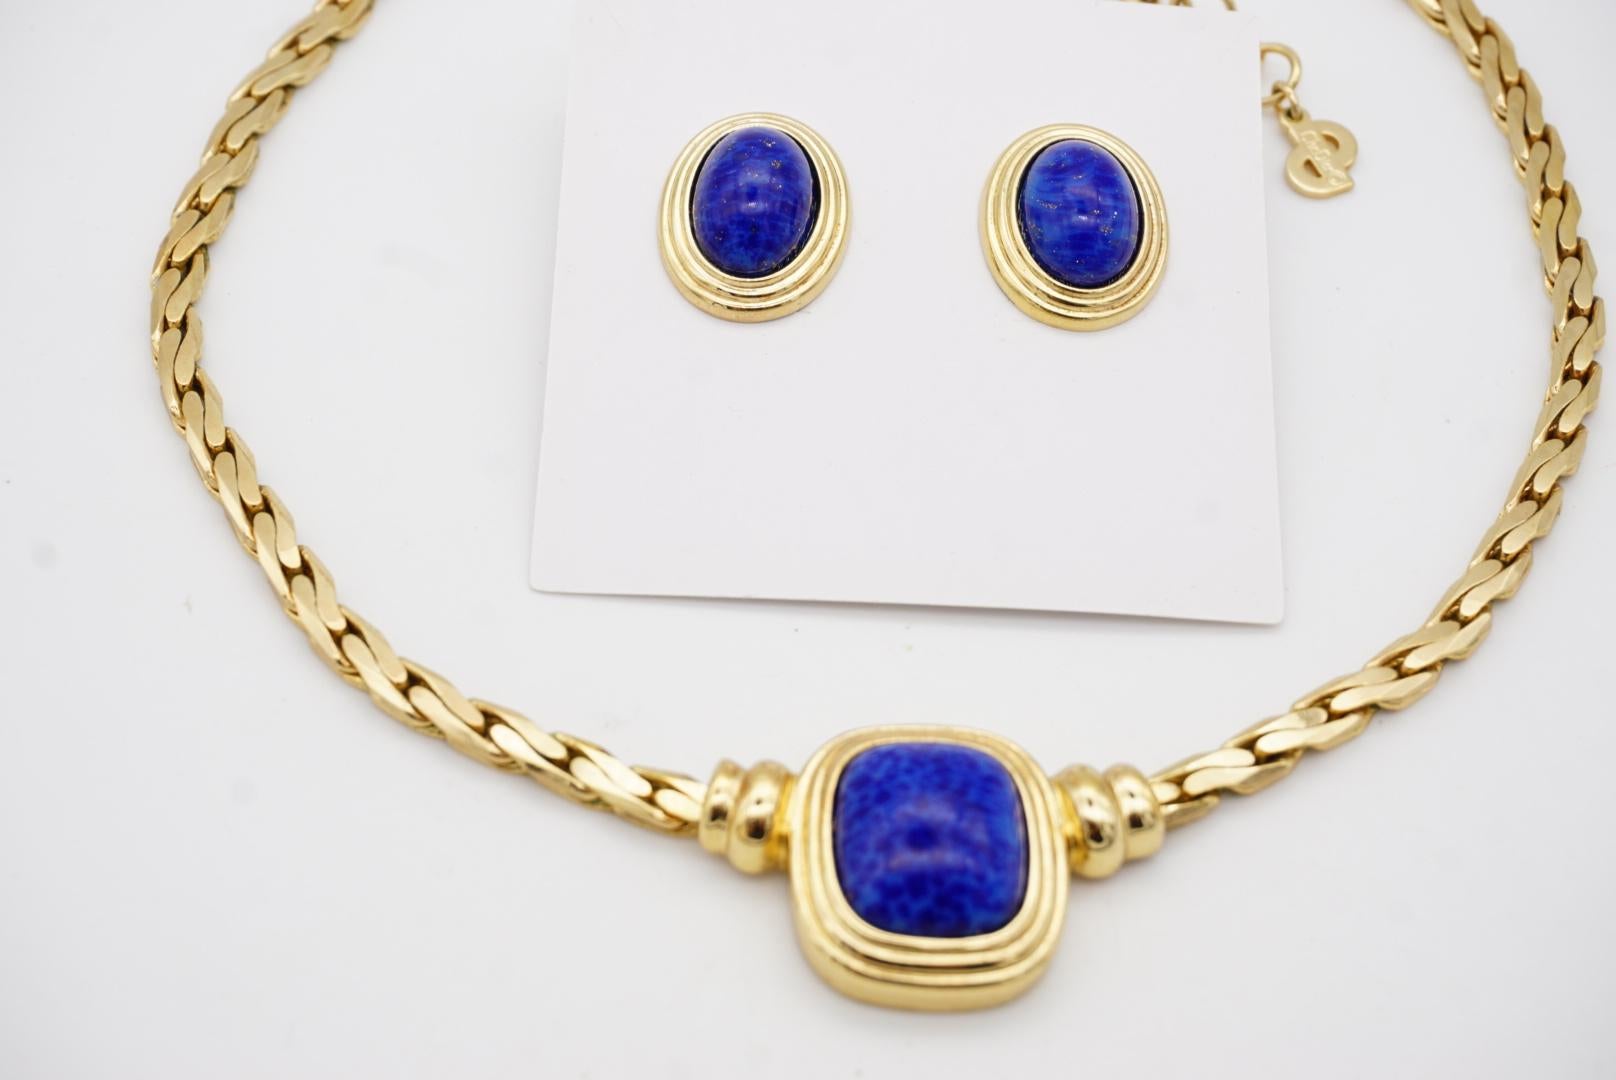 Christian Dior Vintage Lapis Navy Rectangle Oval Cabochon Set Necklace Earrings For Sale 7